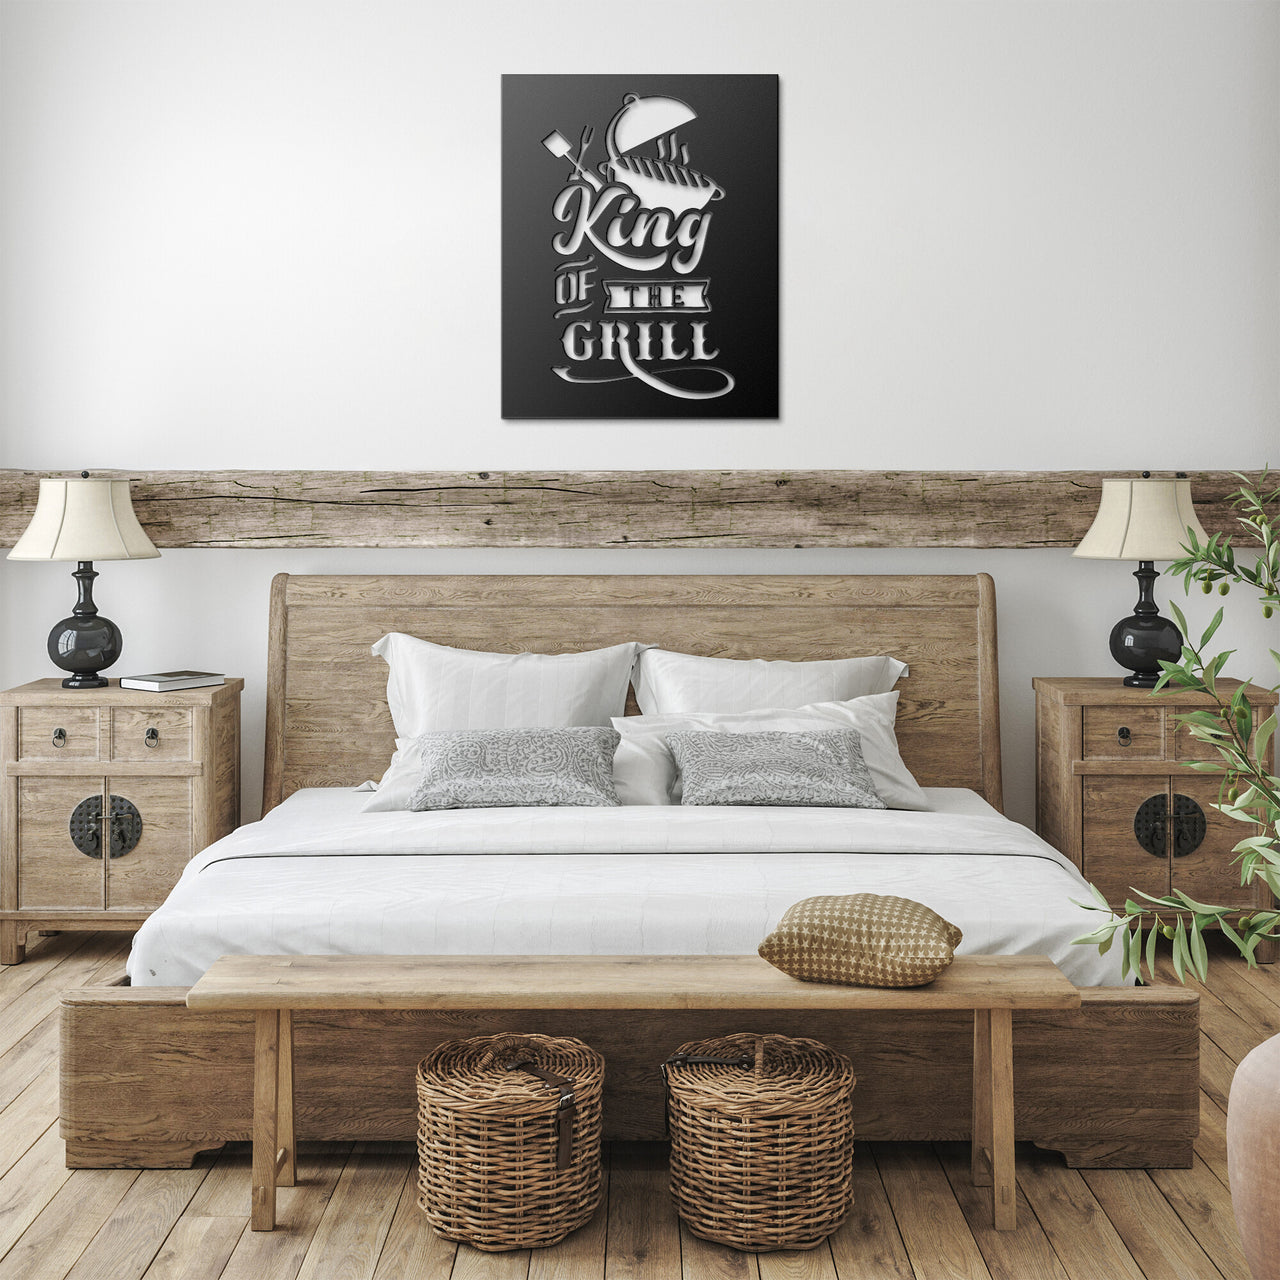 King of the grill, grill and text design on wall over bed